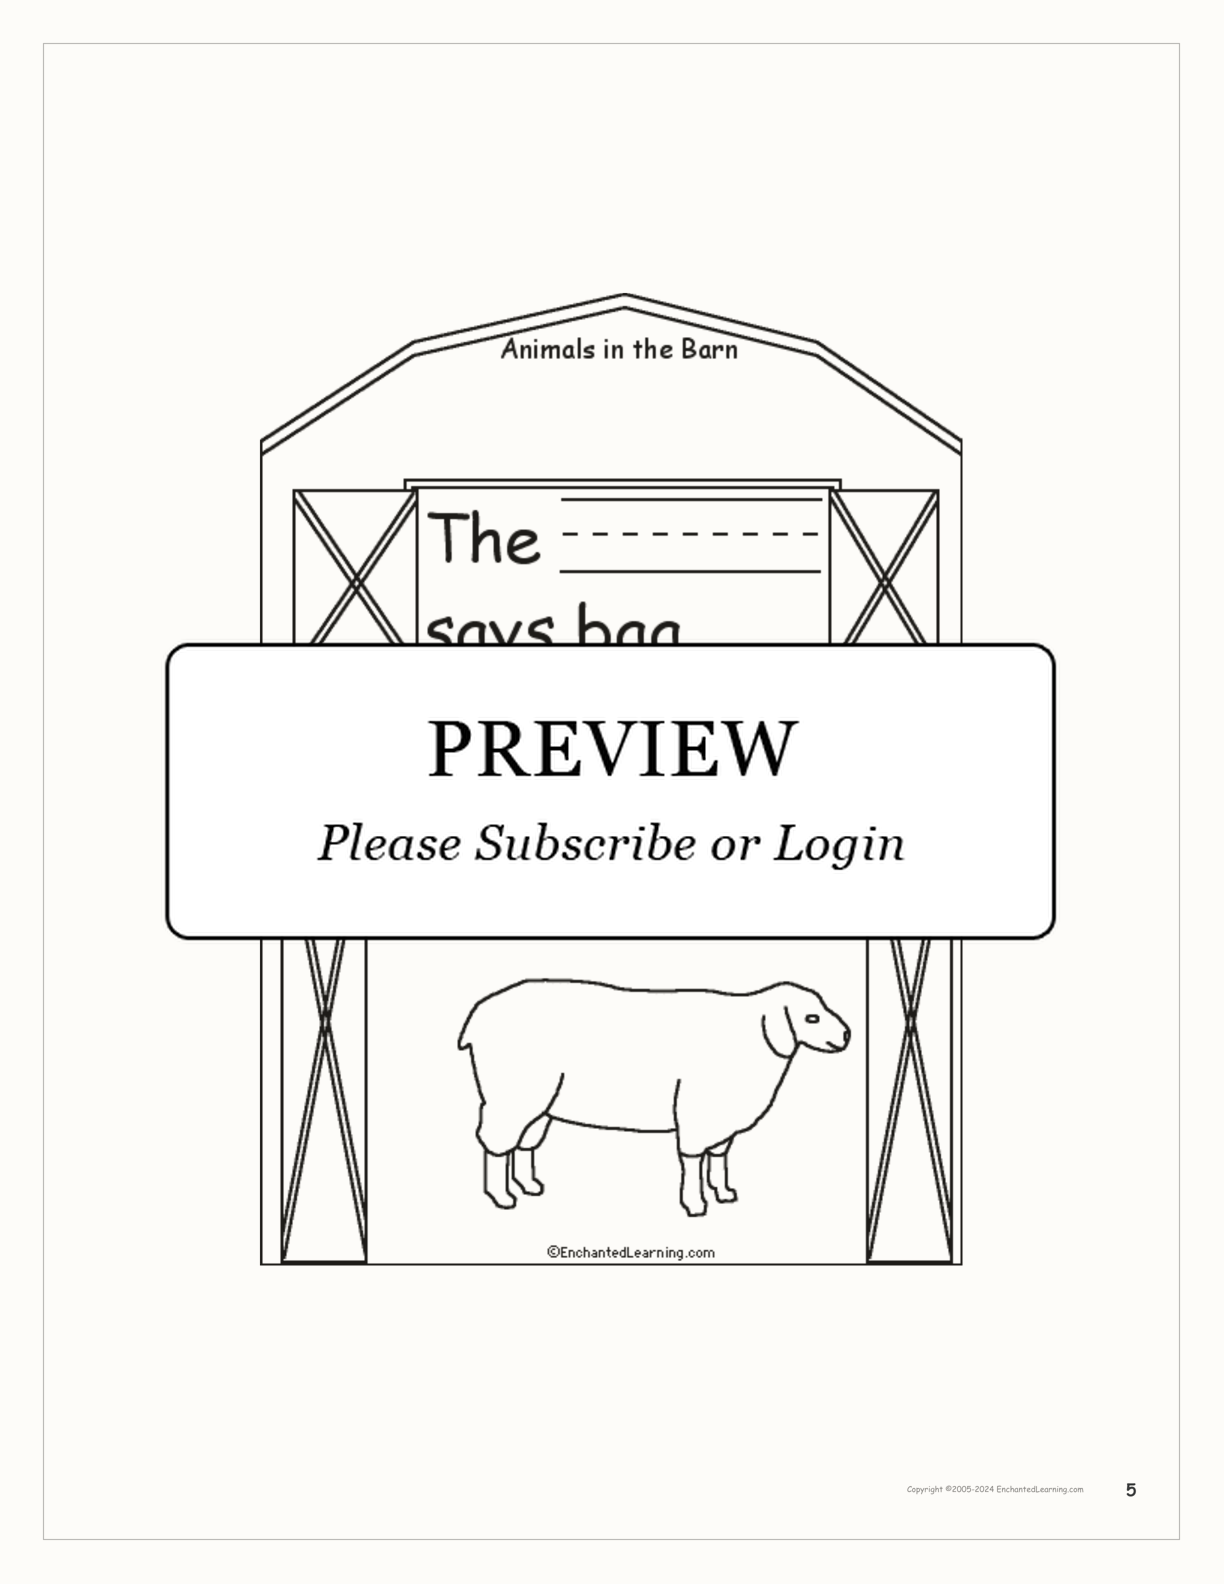 Animals in the Barn Book interactive printout page 5